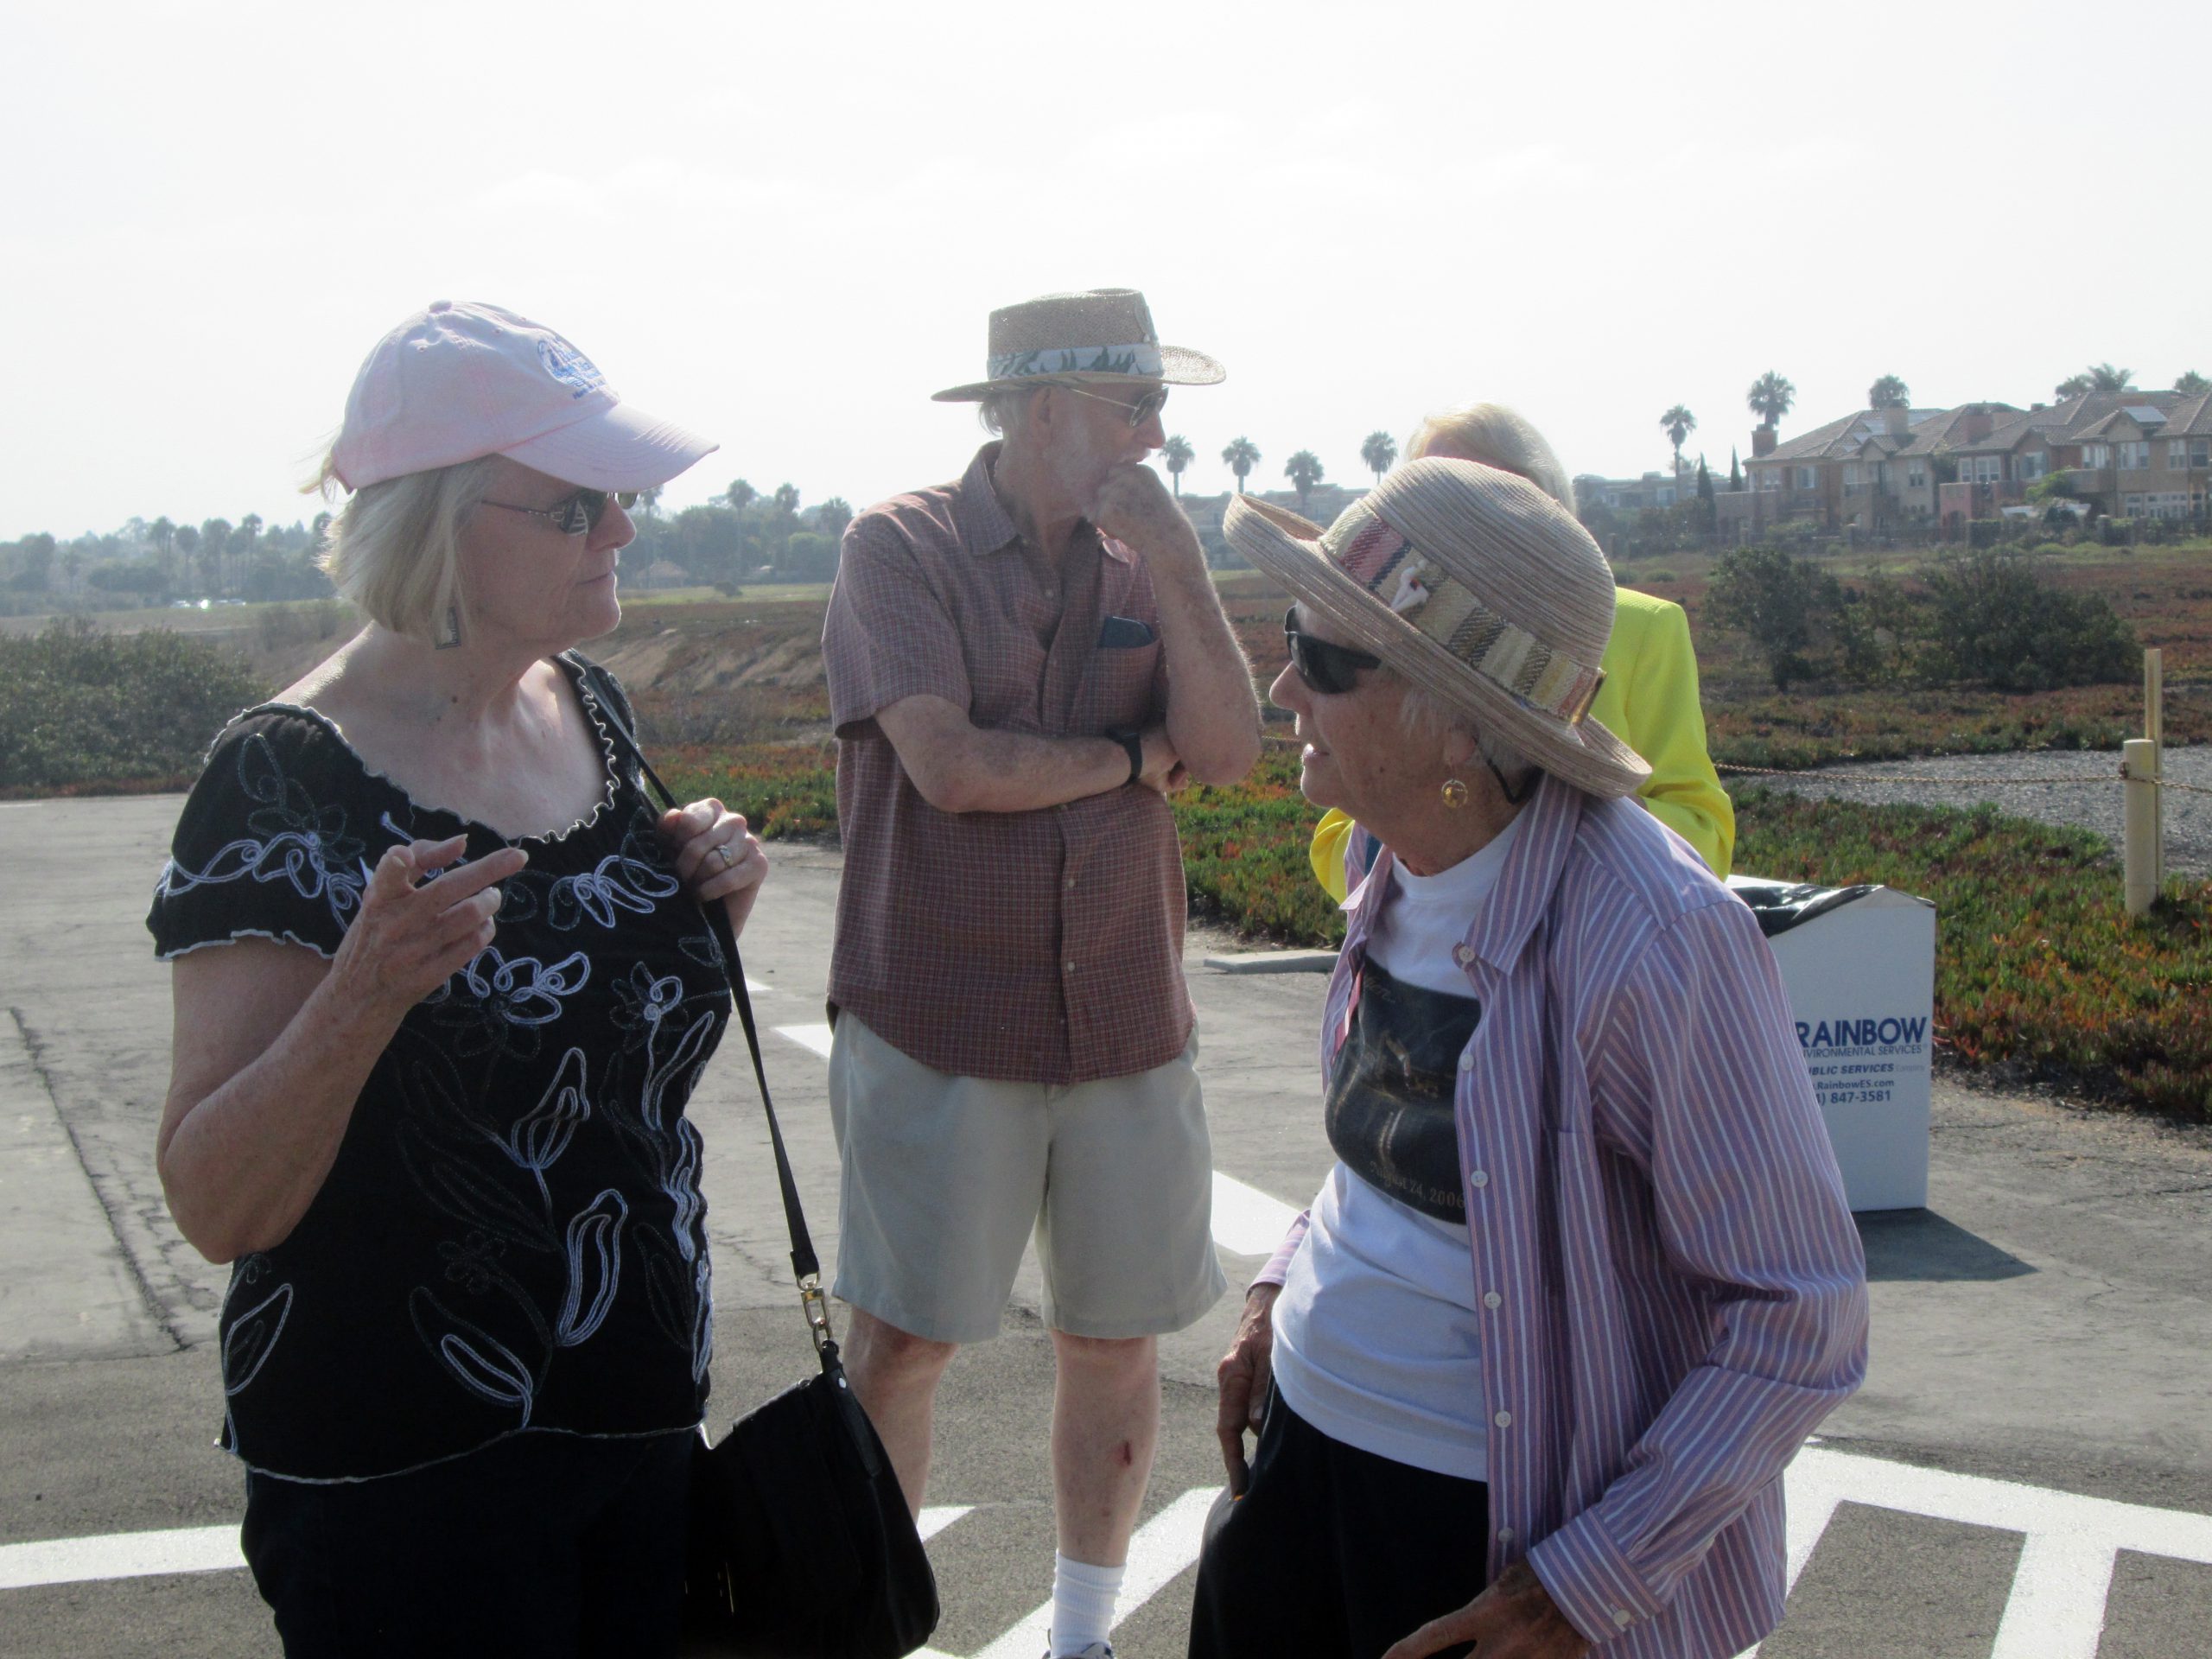 Audience members at the 10th anniversary celebration for the Bolsa Chica Lowlands Restoration Project